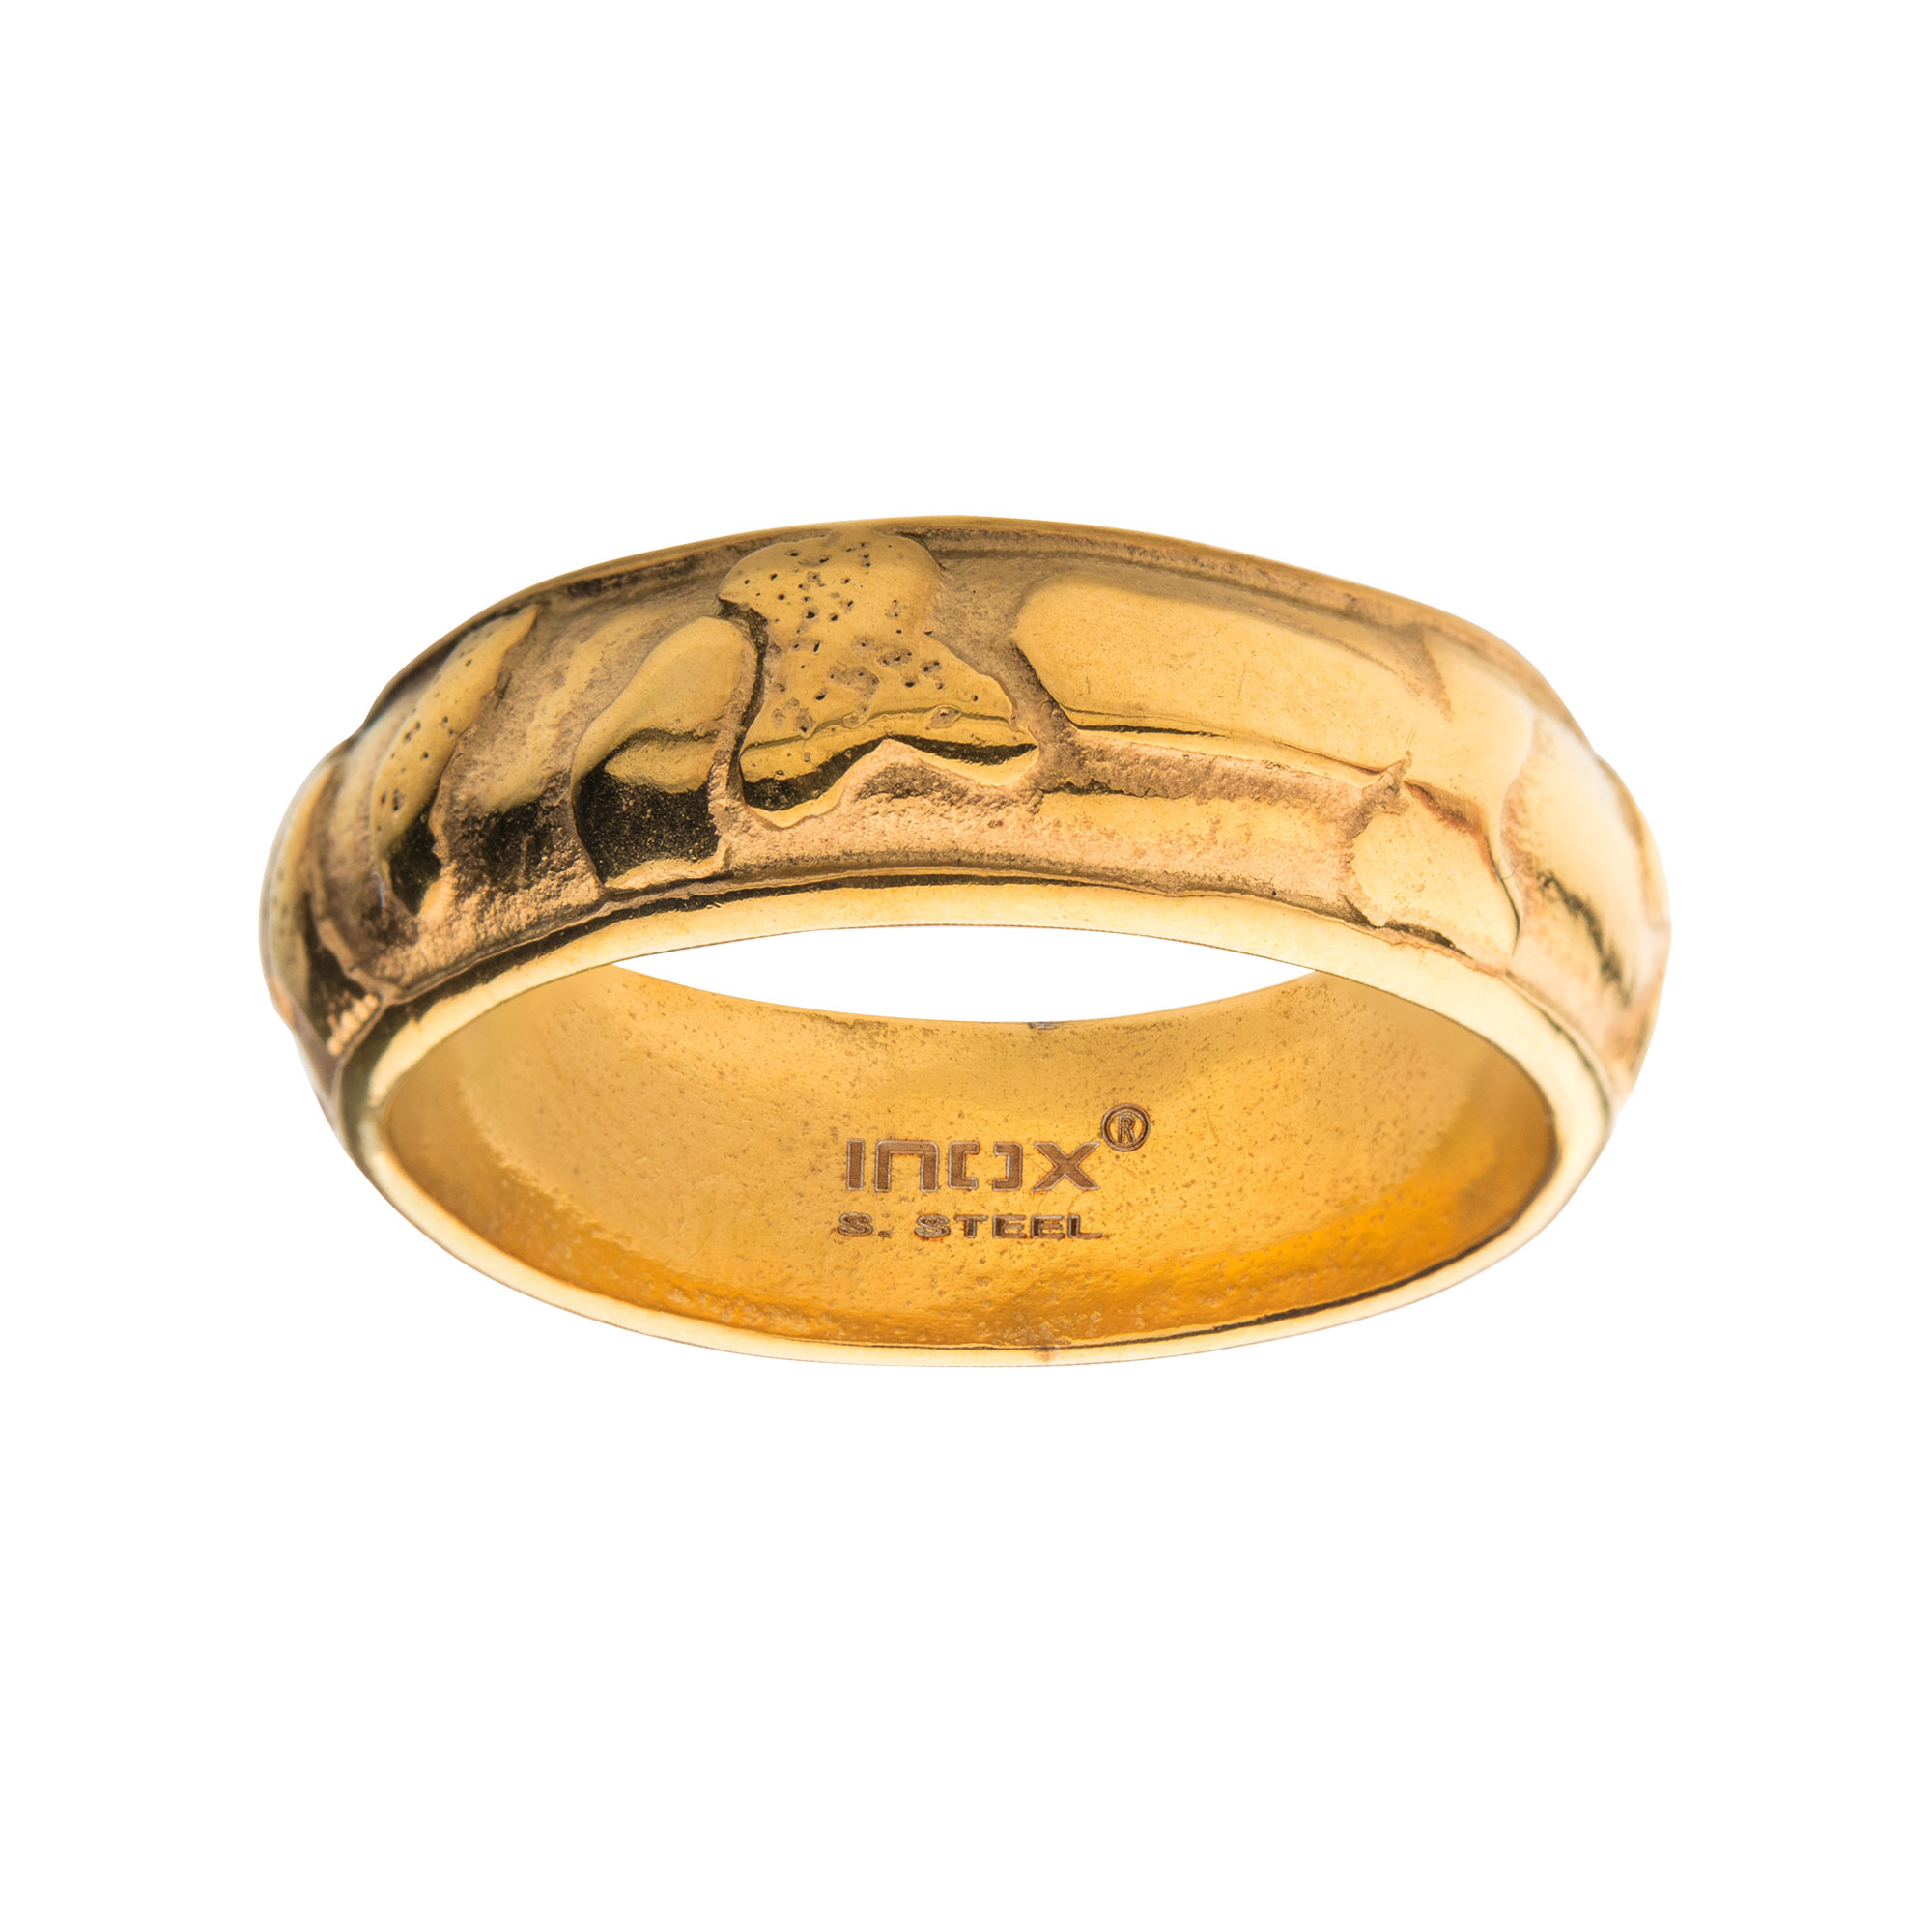 7.5mm Gold Plated 3D Canyon Pattern Ring Image 2 Ken Walker Jewelers Gig Harbor, WA